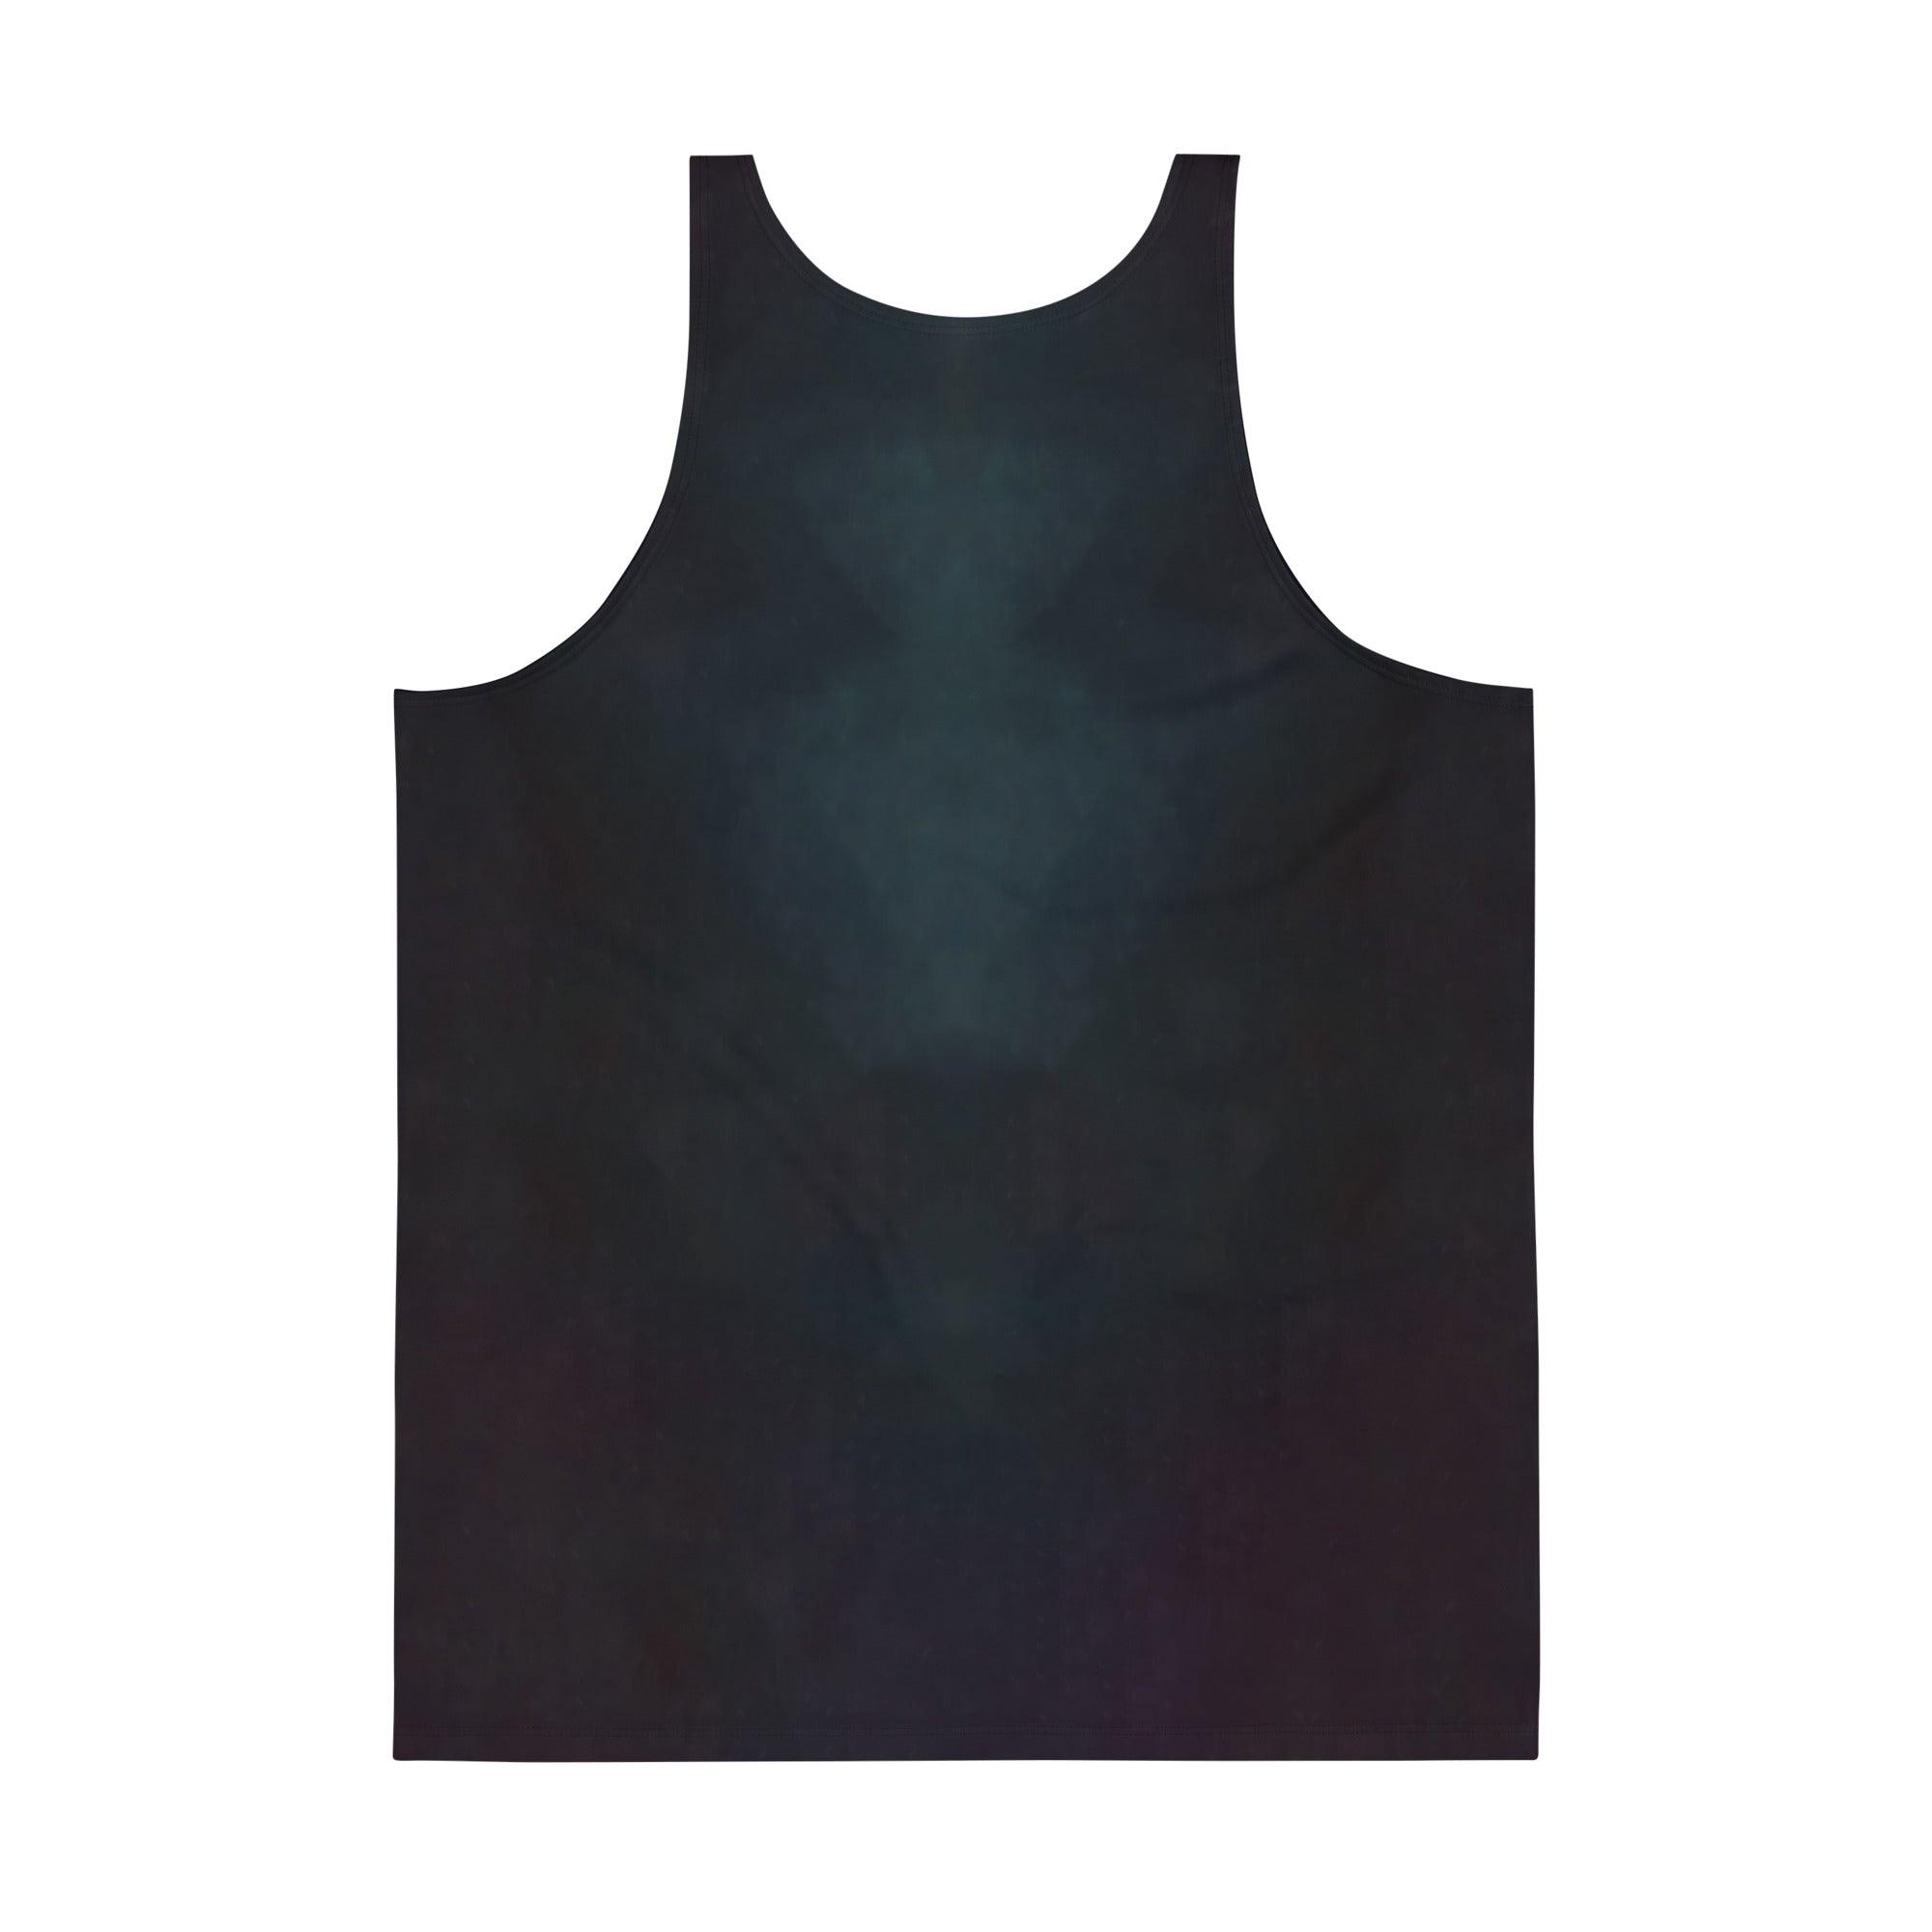 NS 862 Men's athletic tank top side view.